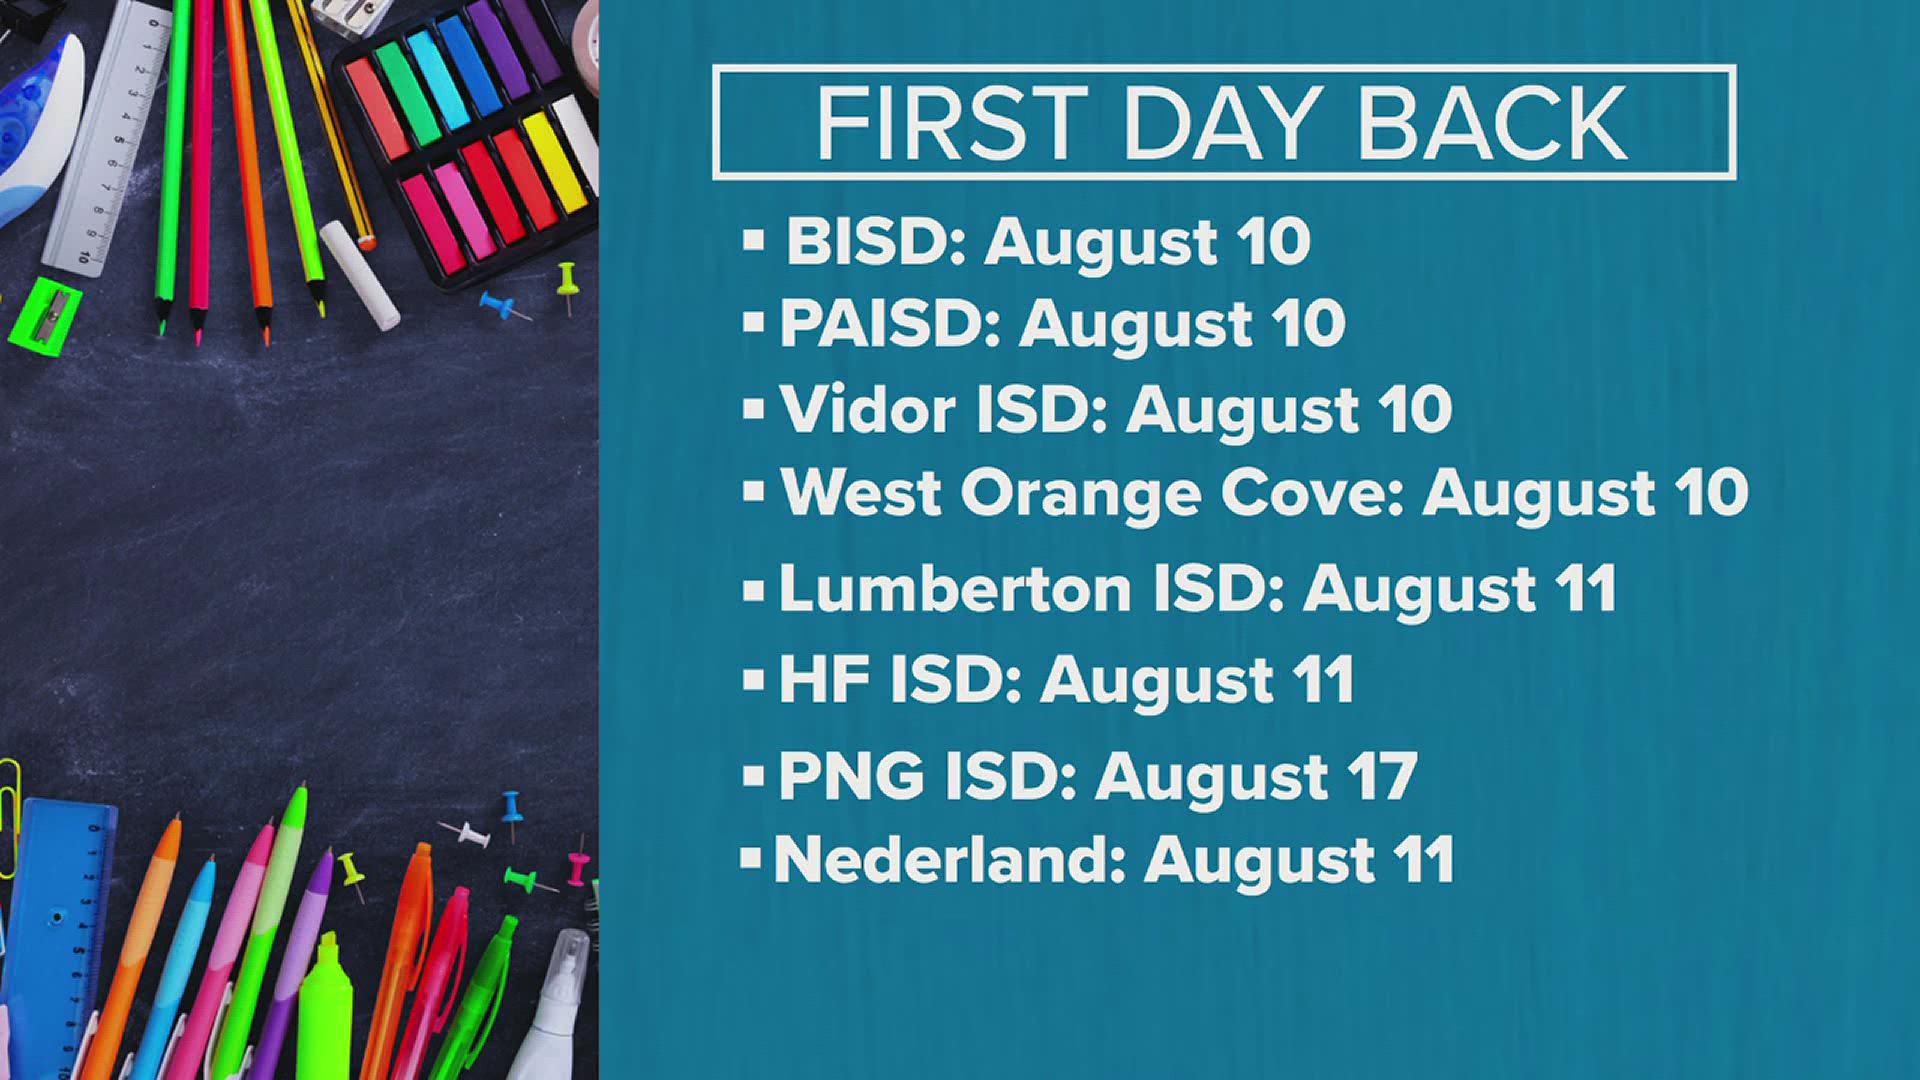 The Beaumont, Port Arthur, Vidor and West Orange Cove Consolidated Independent School Districts will start school on August 10, 2022.